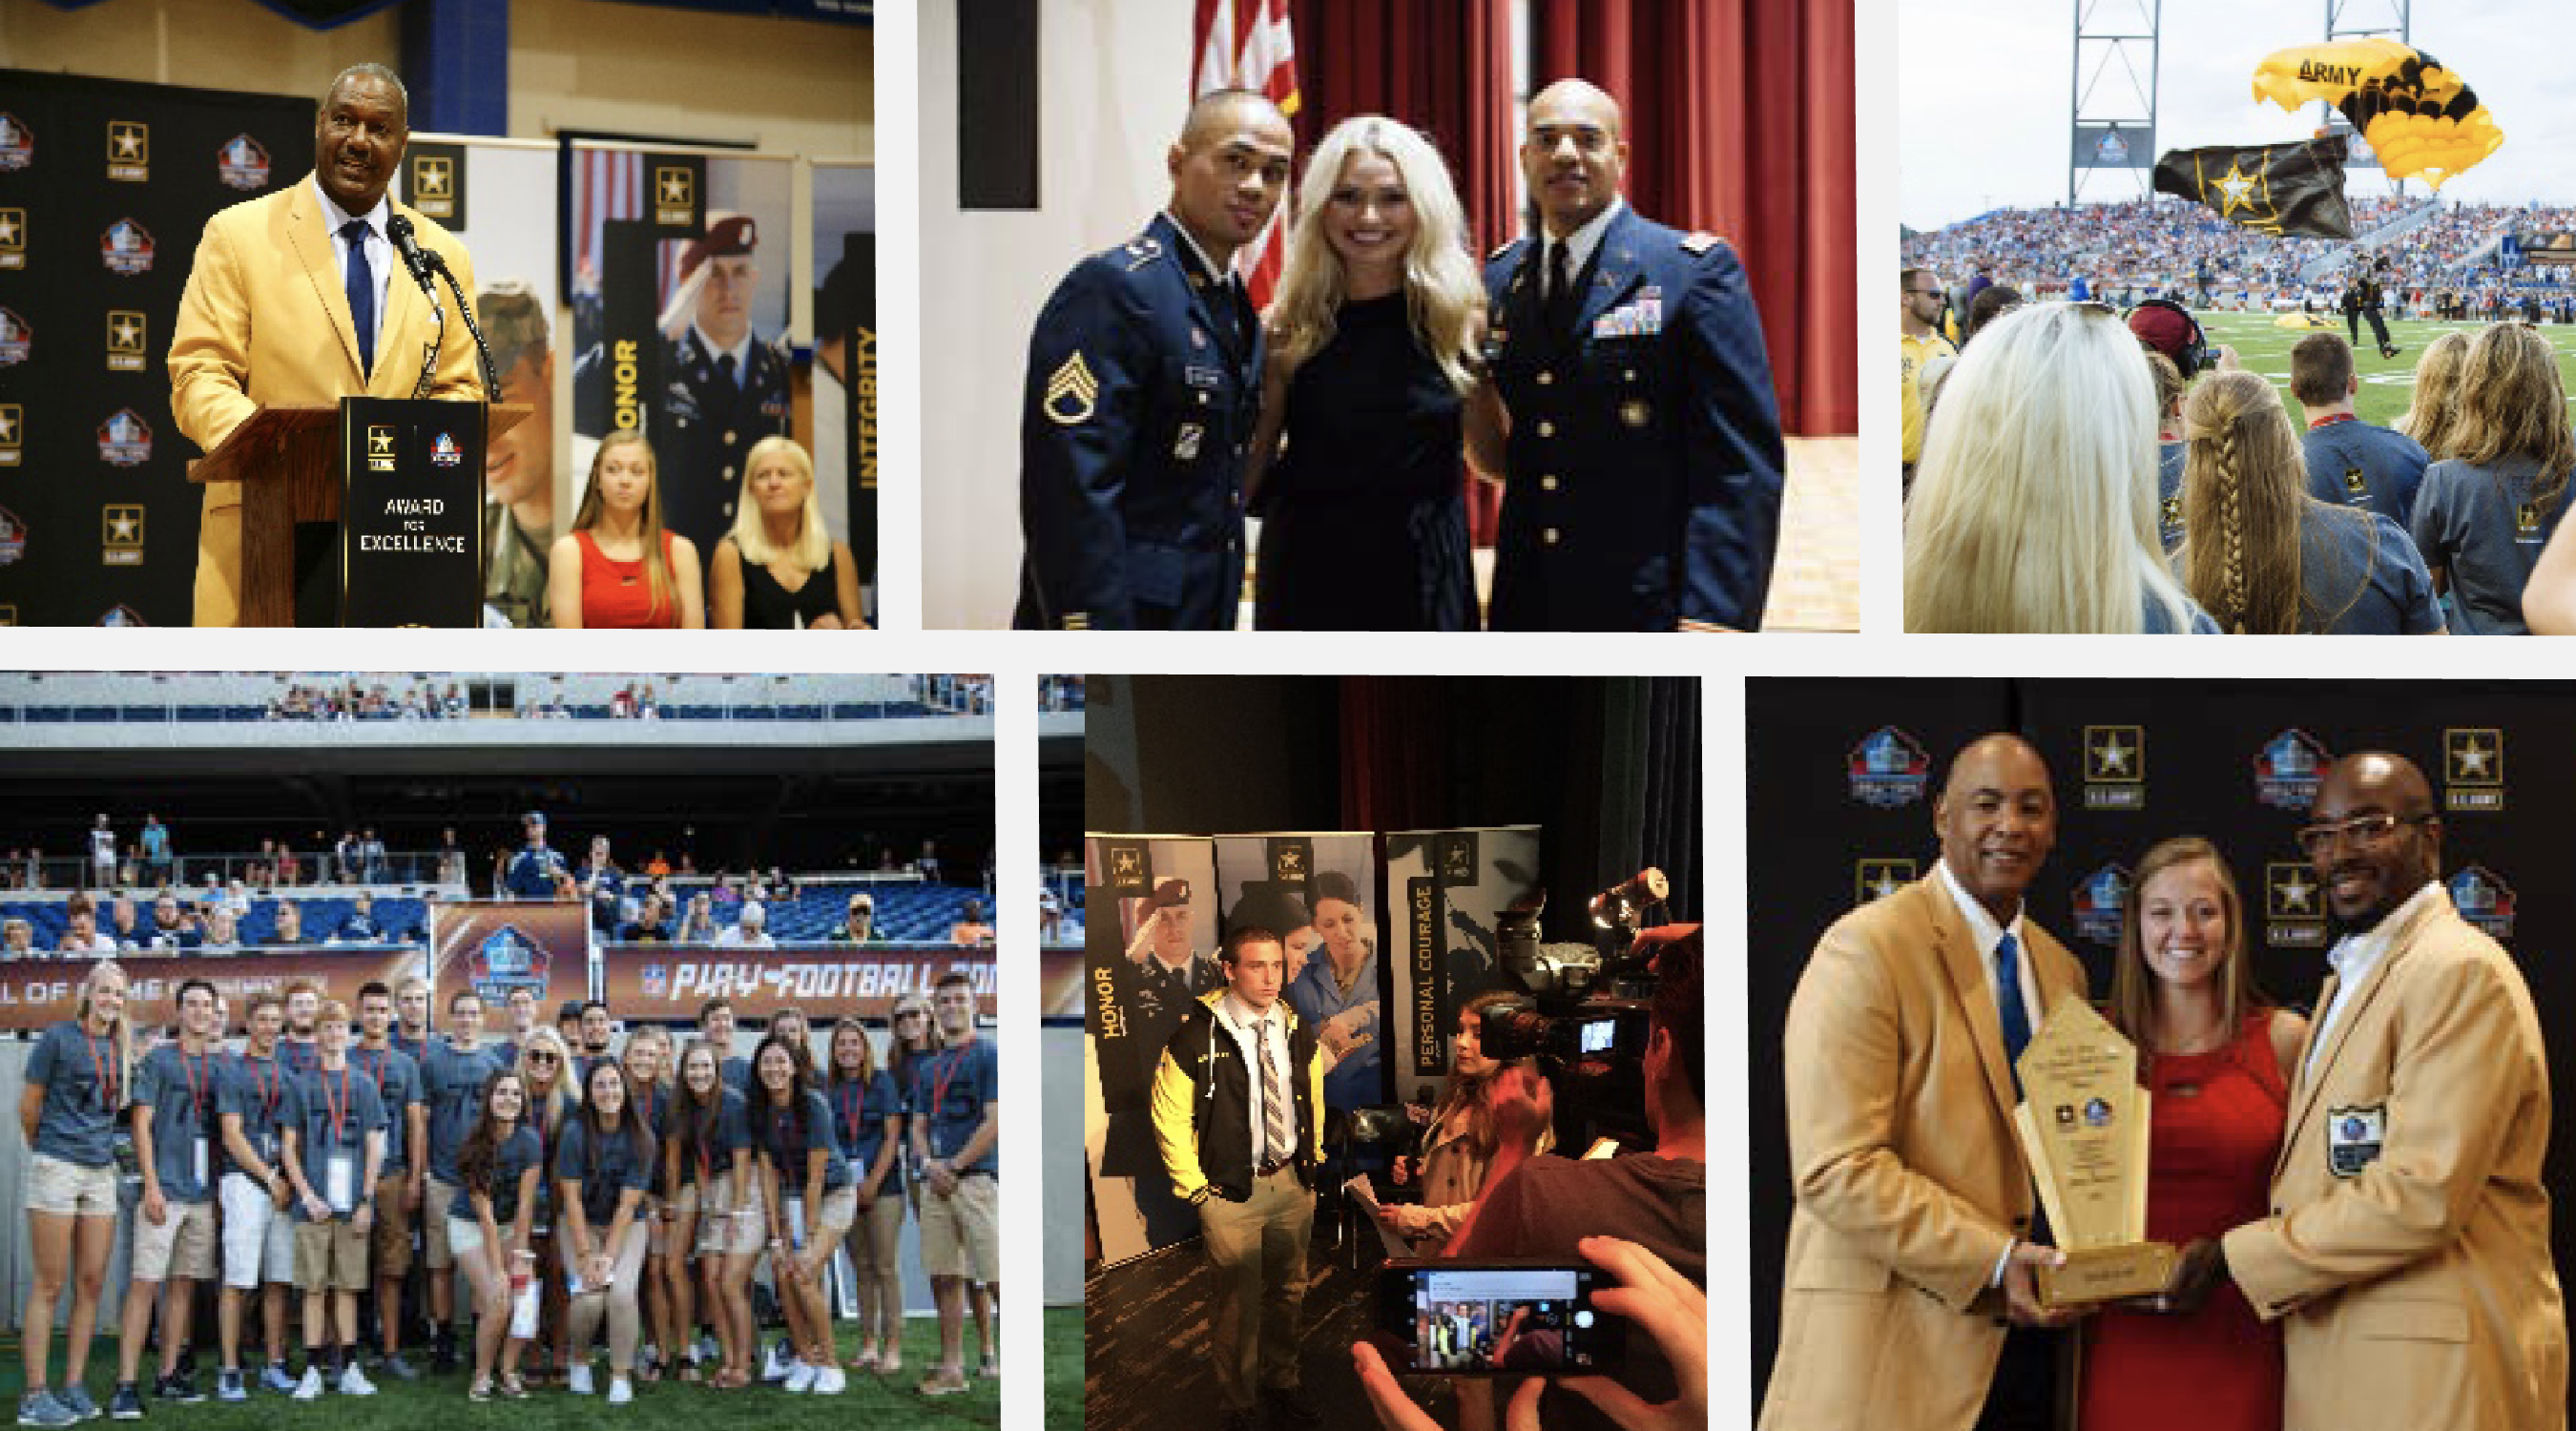 U.S. Army – Pro Football Hall of Fame Award of Excellence